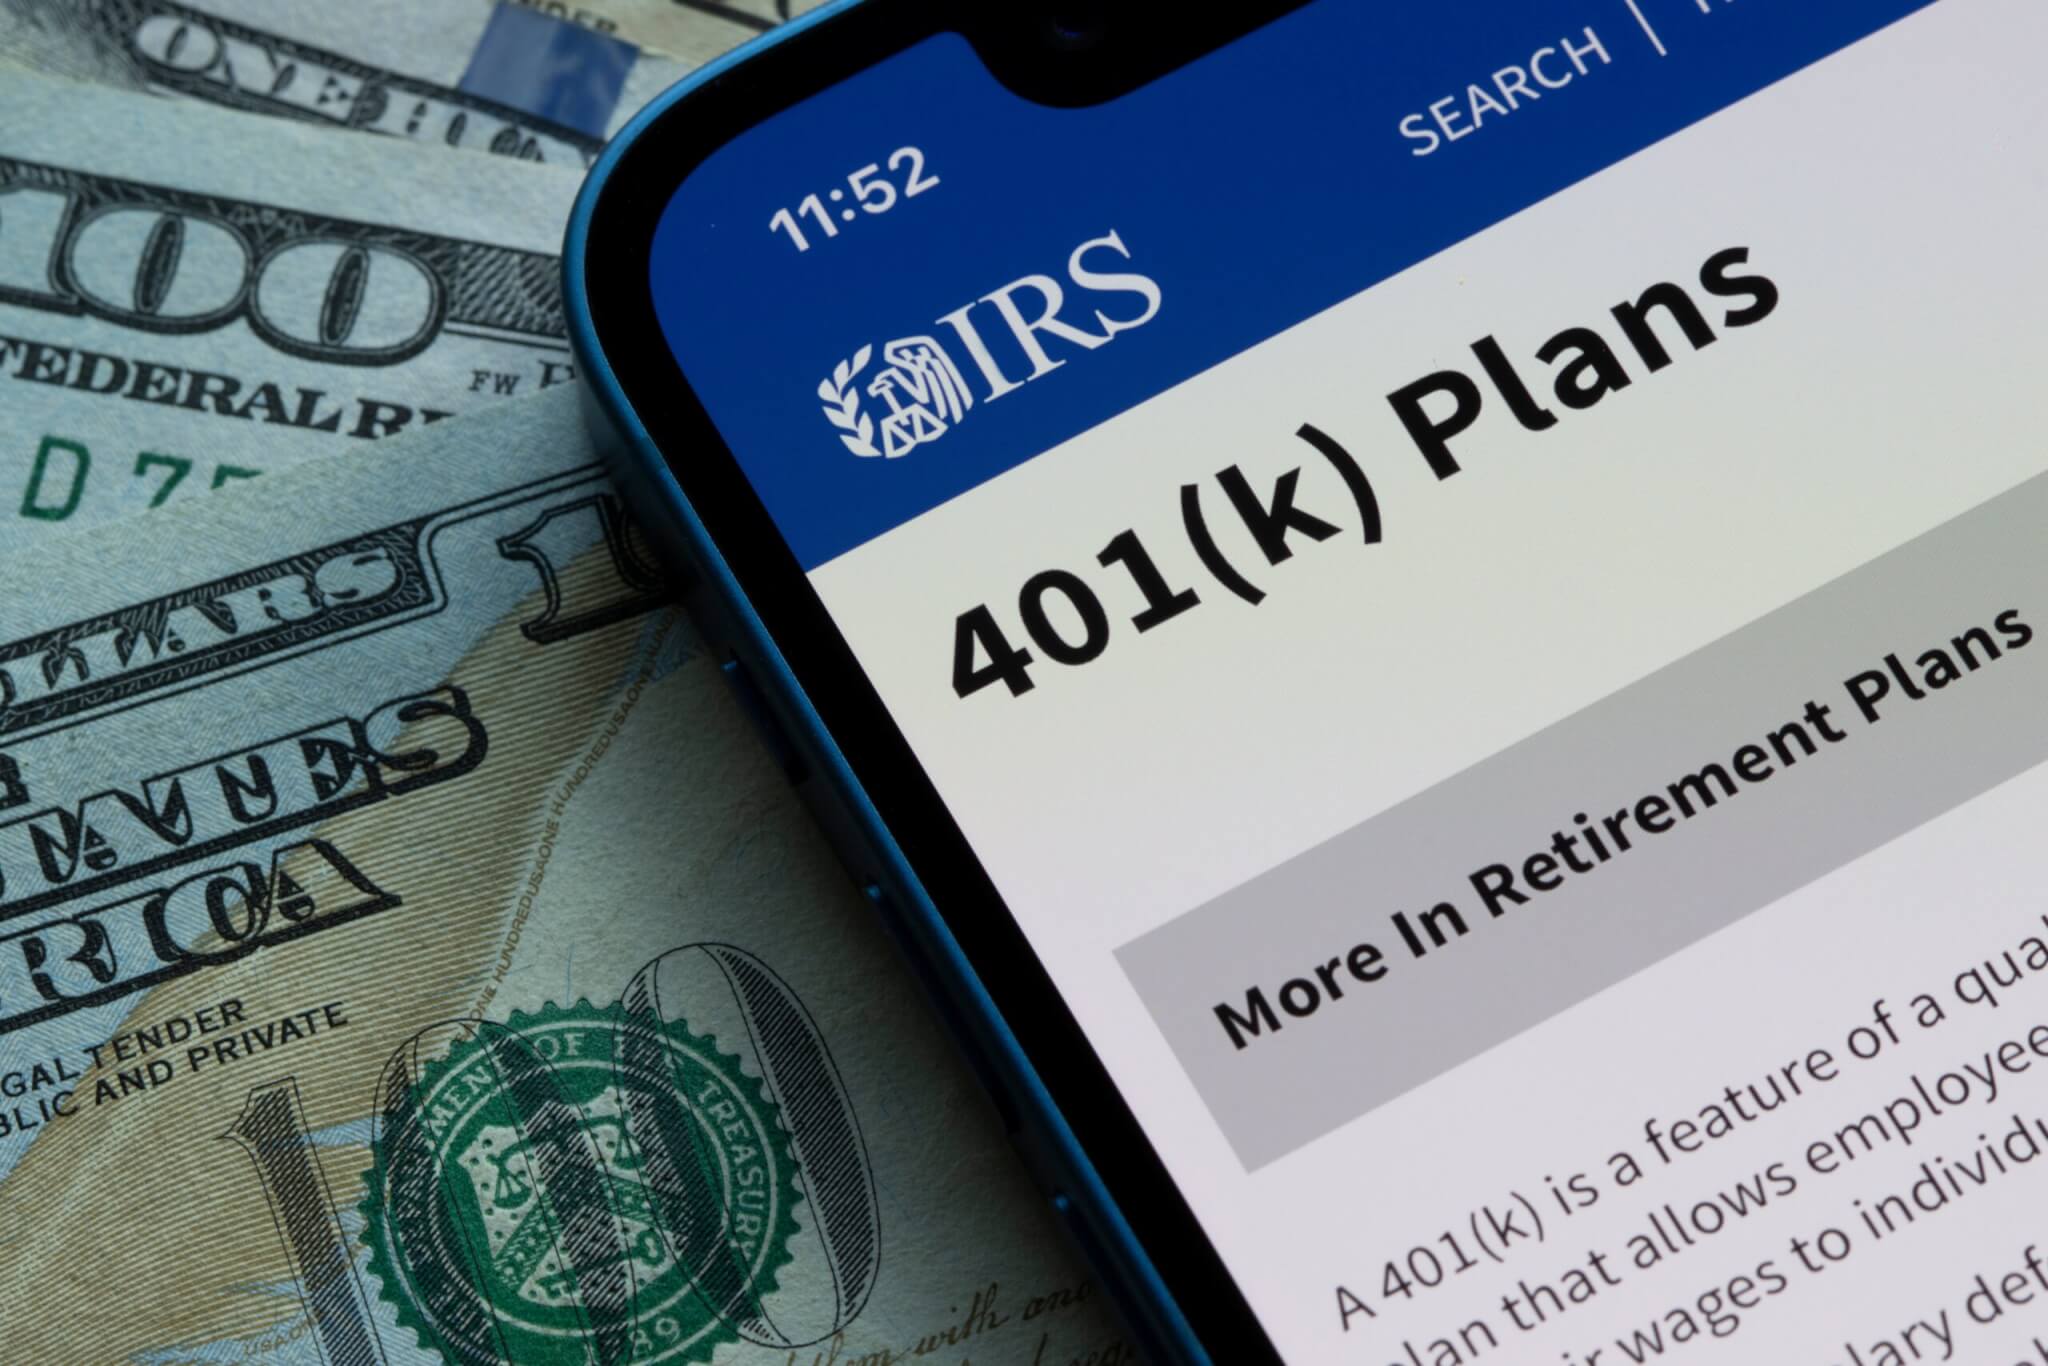 401(k) plans information on smartphone and IRS website